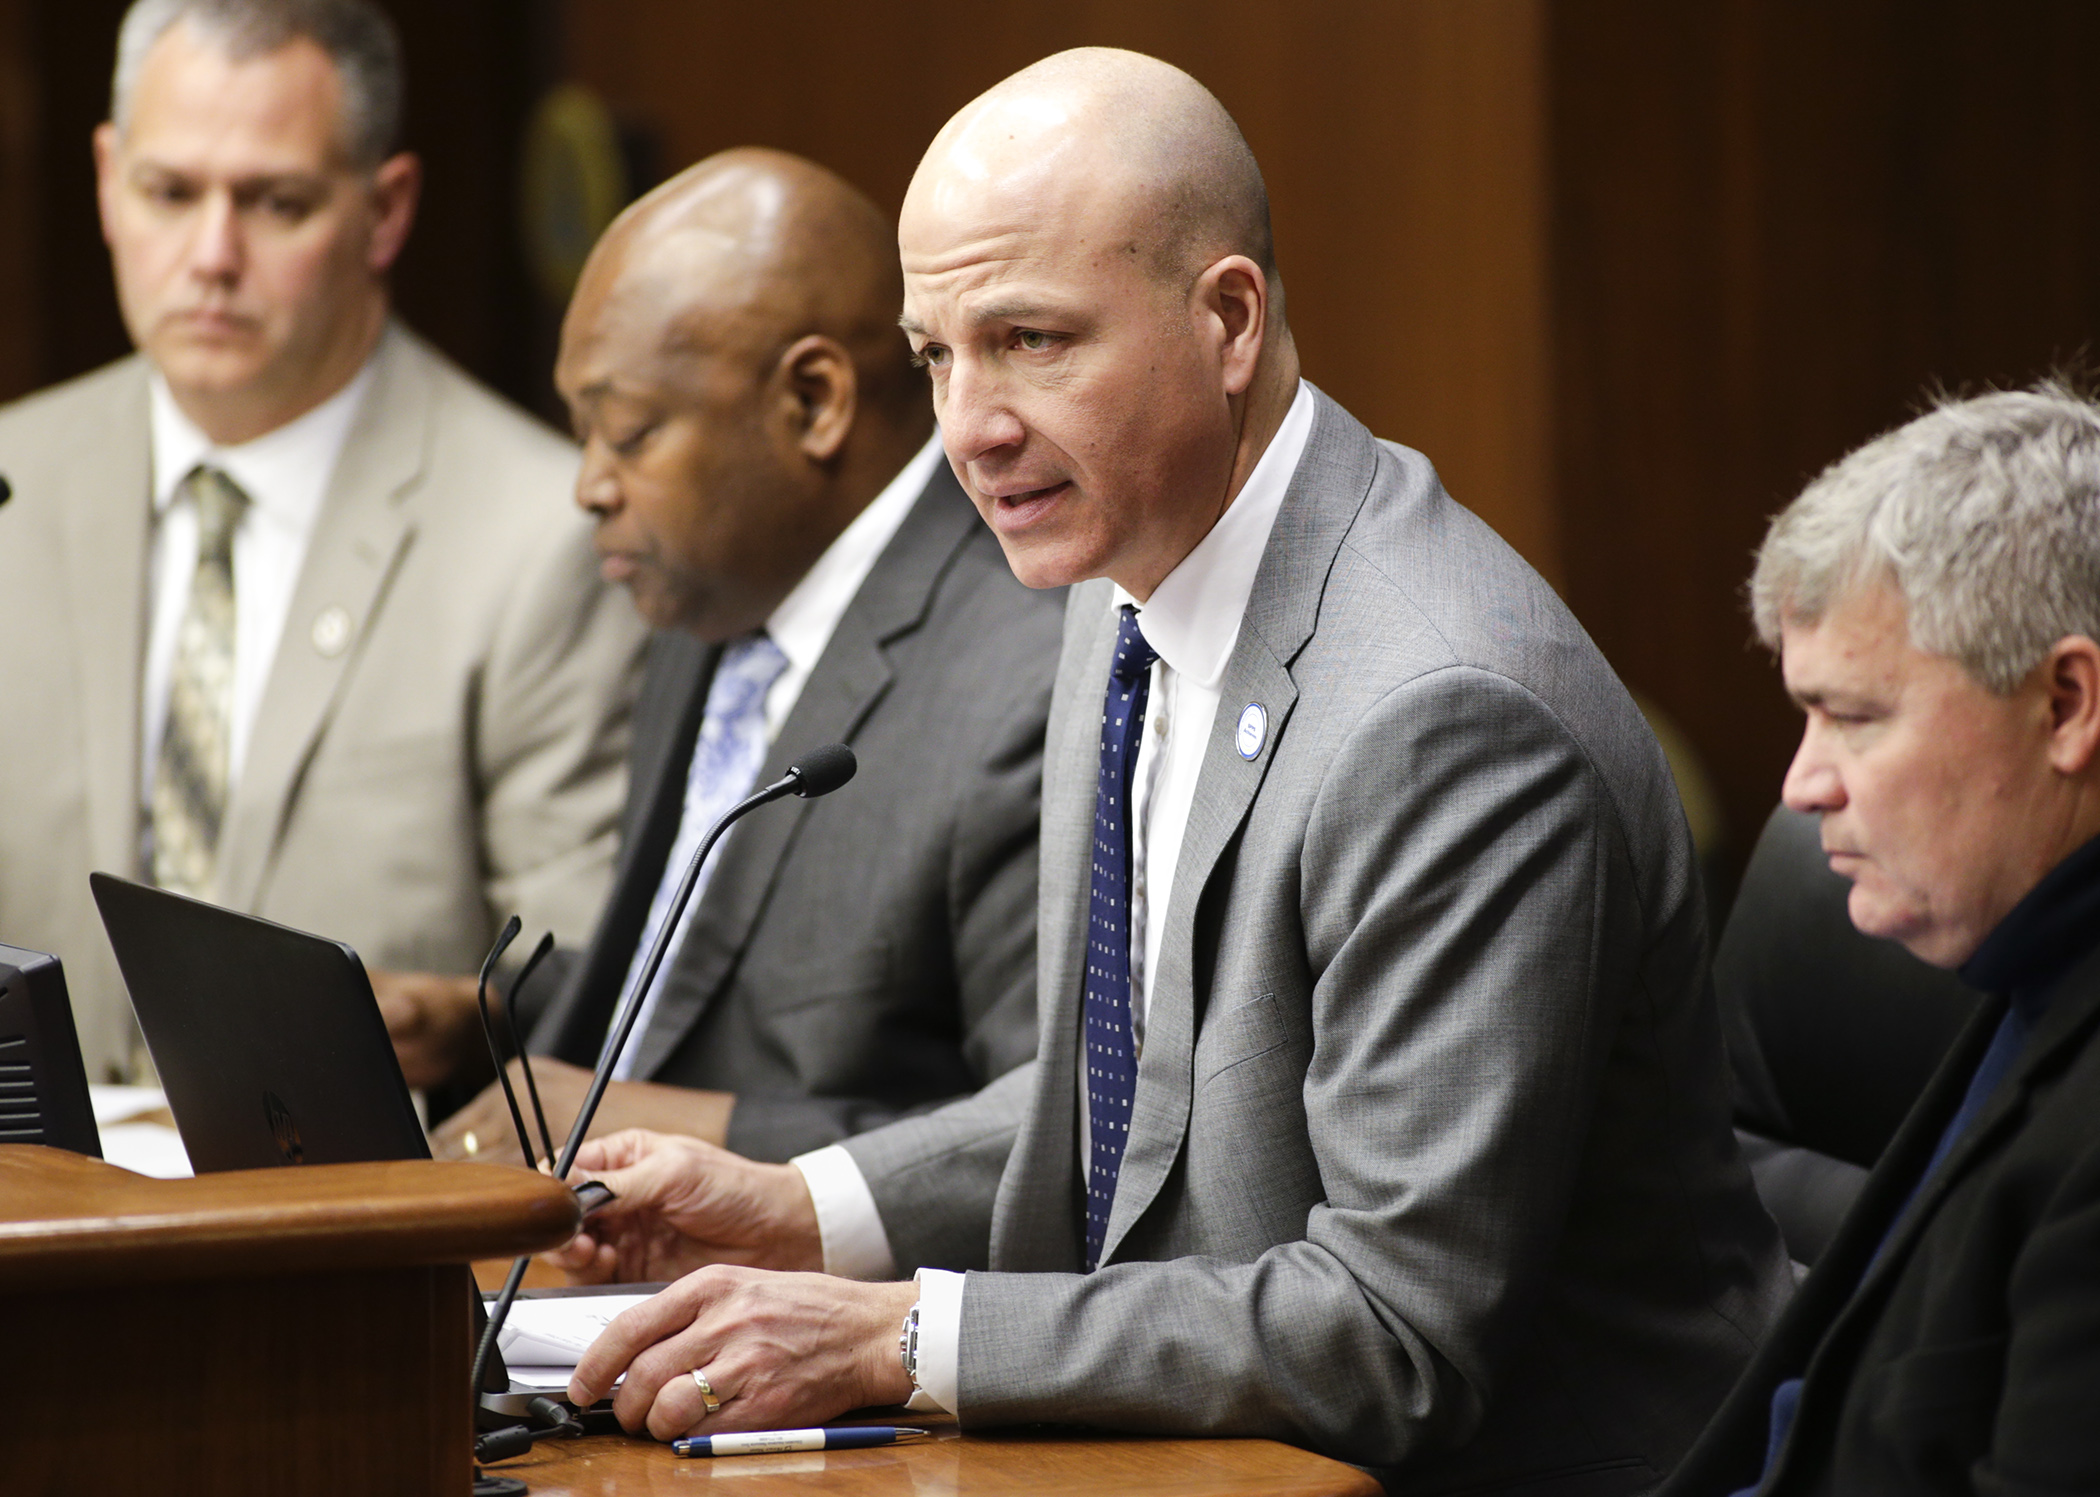 St. Paul Schools Superintendent Joe Gothard describes to the House Education Finance Division Jan. 31 some challenges his district faces related to special education funding. Photo by Paul Battaglia